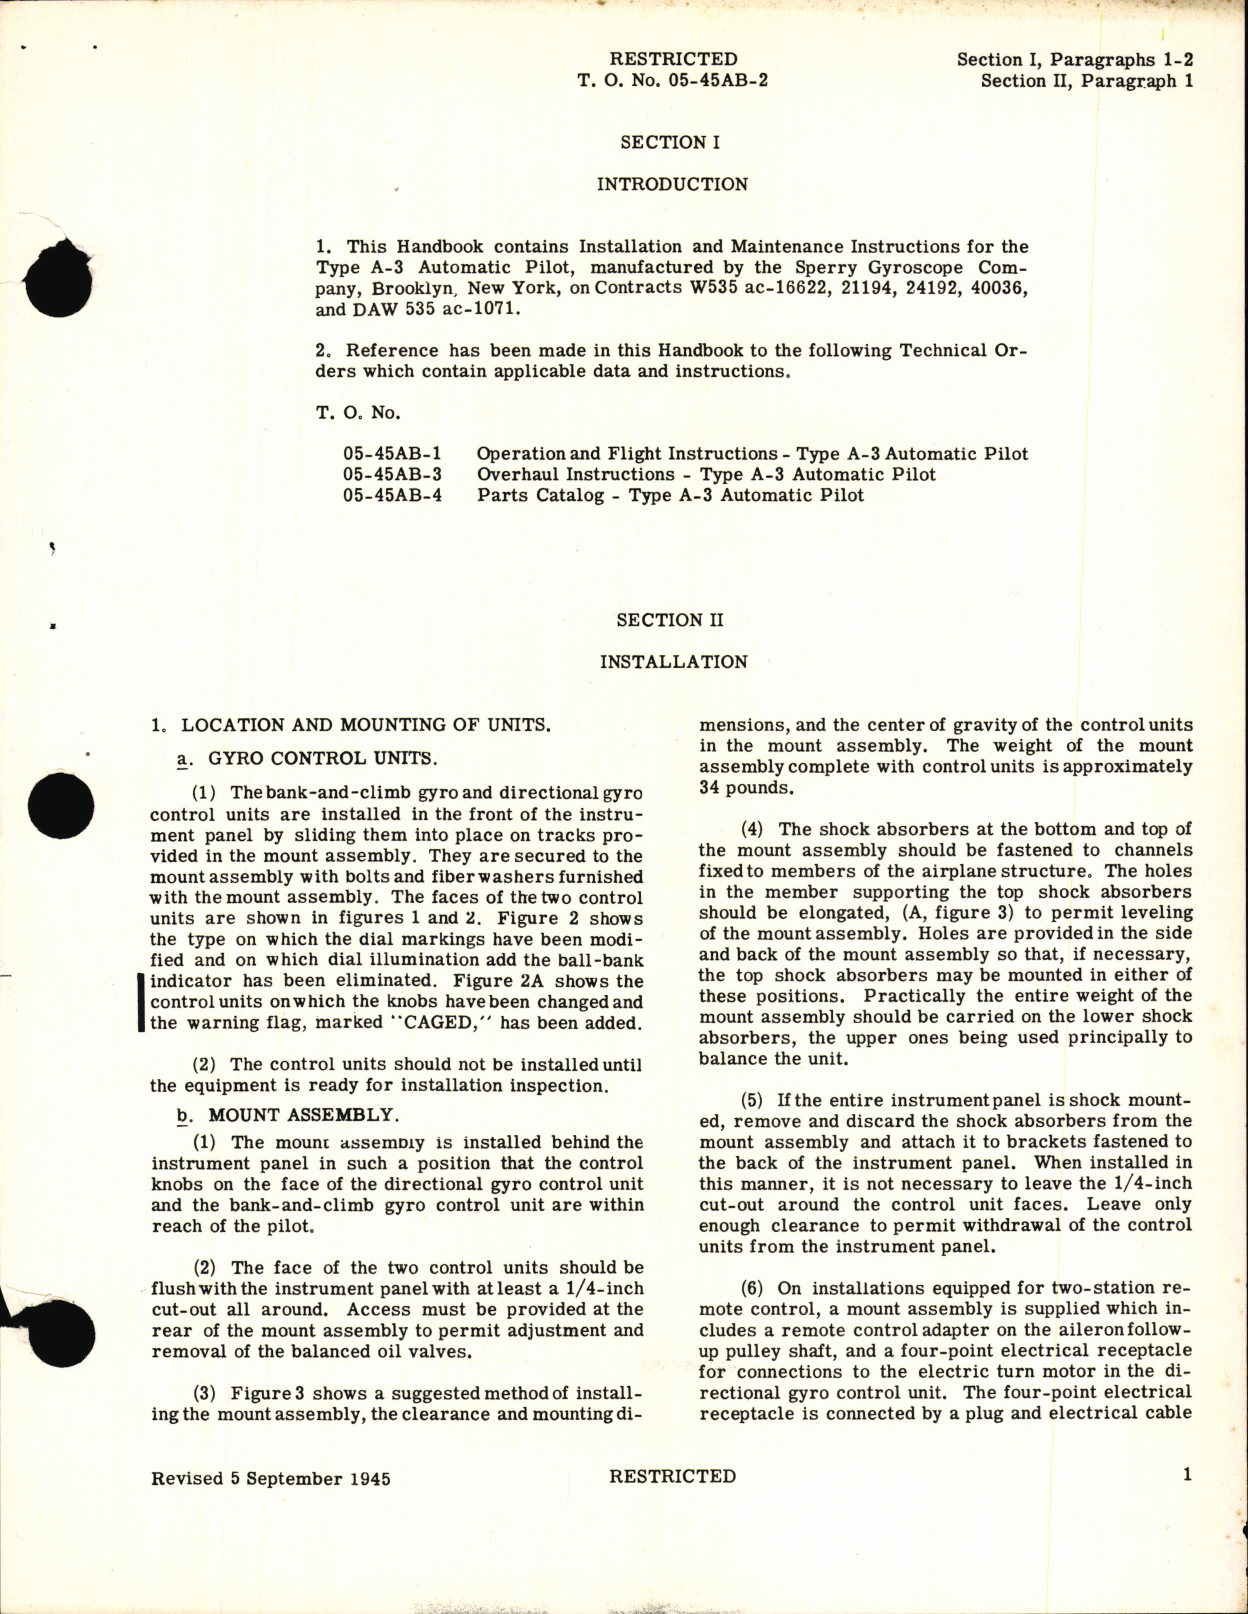 Sample page 9 from AirCorps Library document: Service Instructions for Automatic Pilot Type A-3